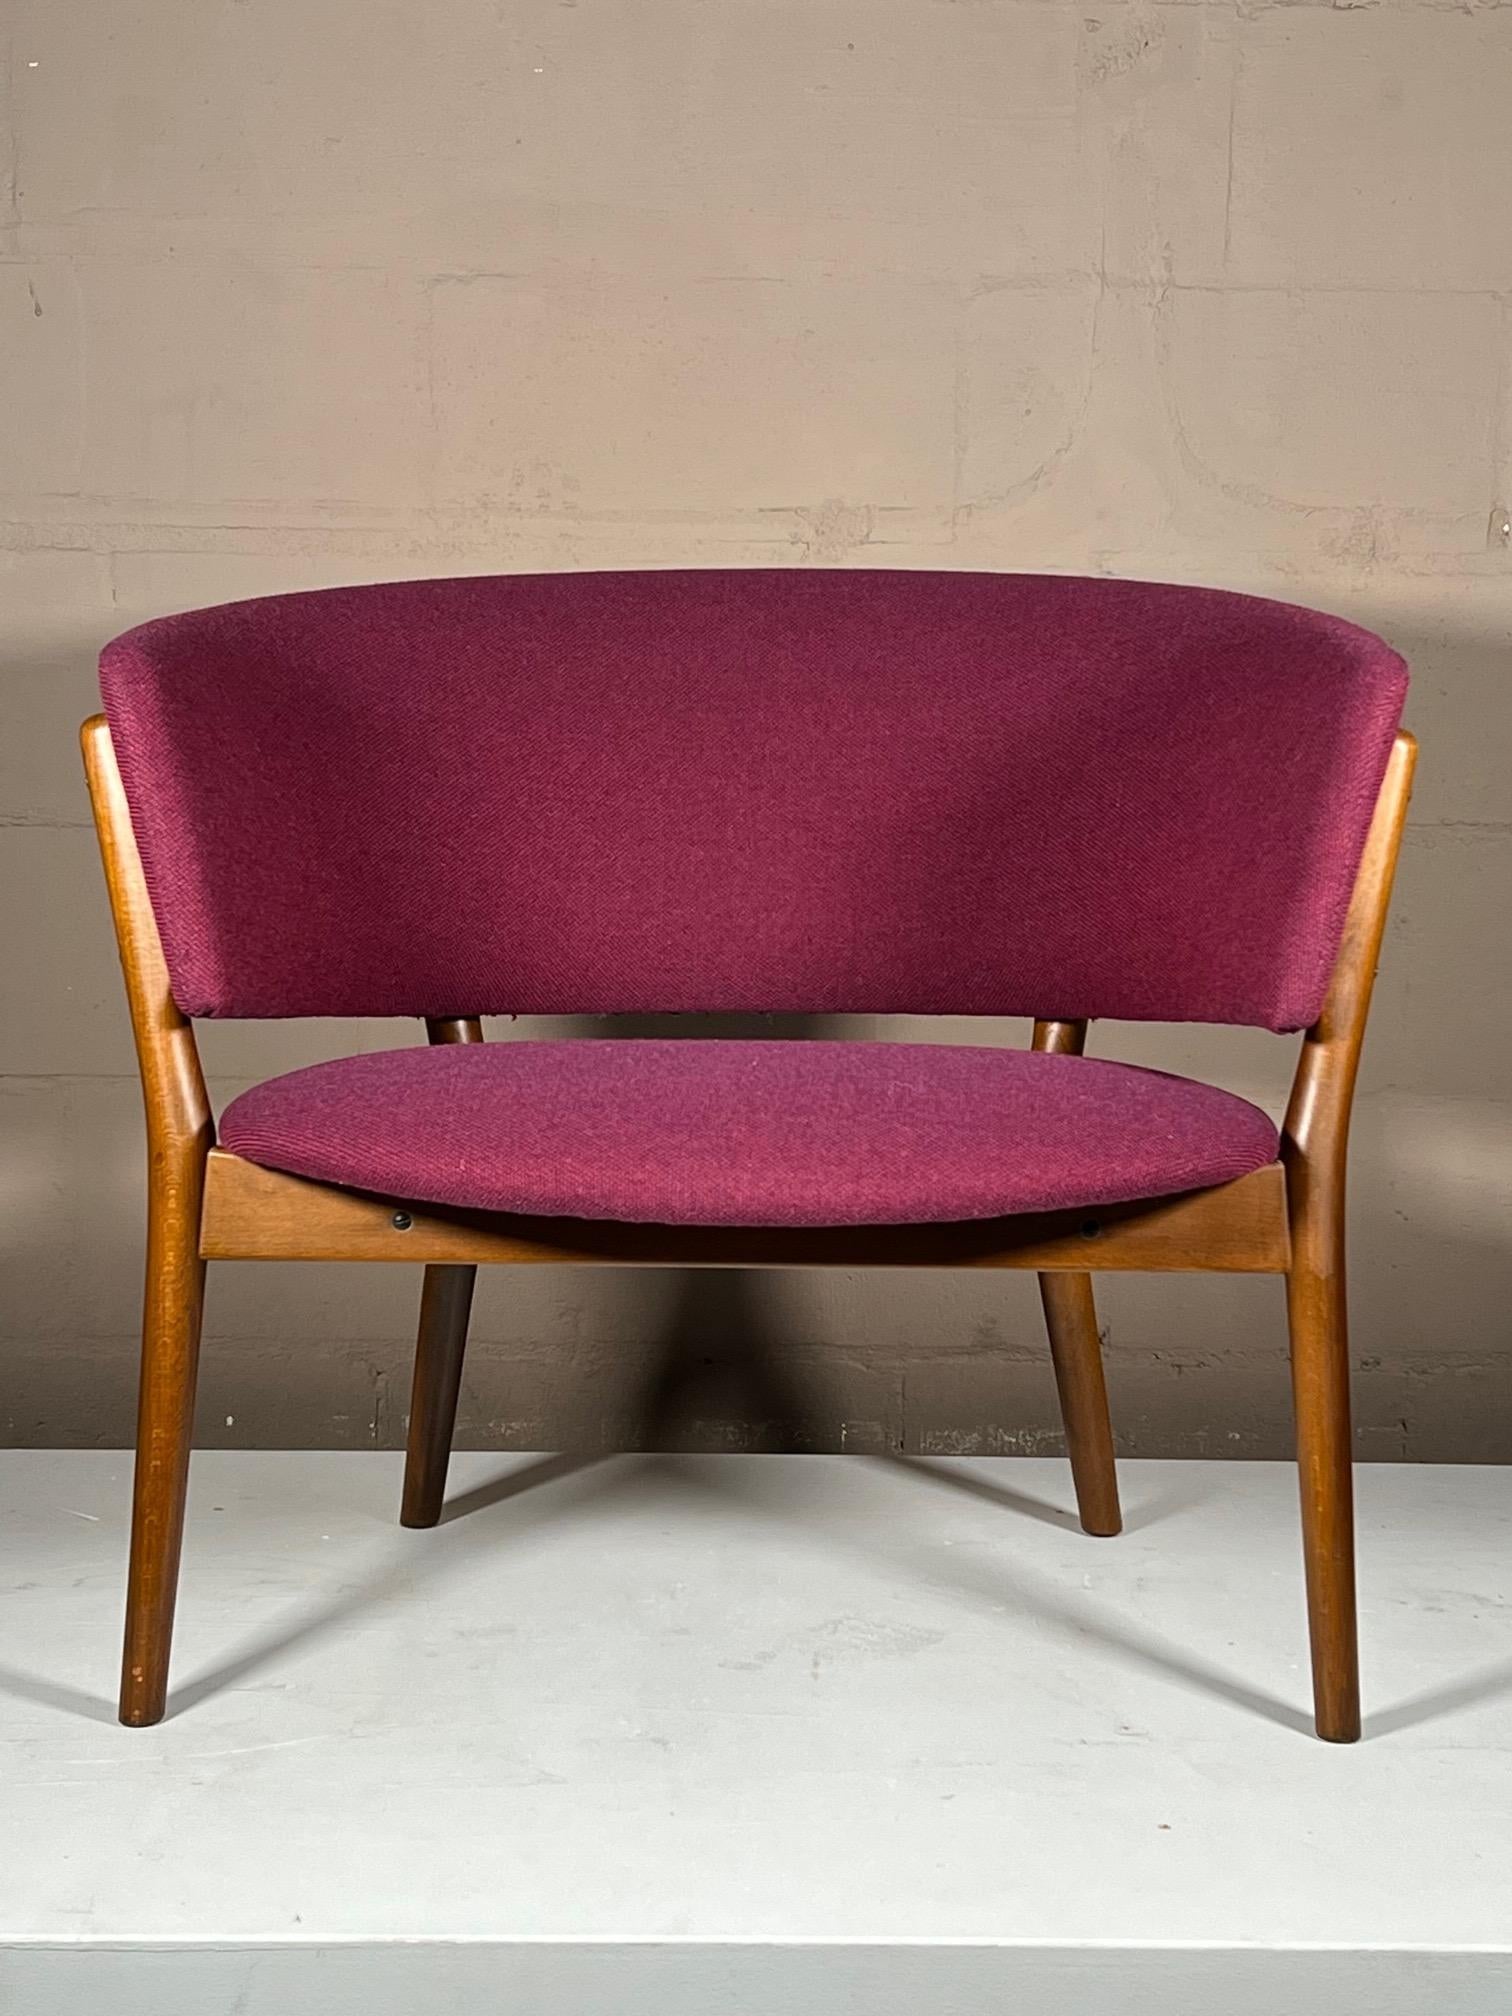 A classic barrel chair known as the ND83, designed by Nanna Ditzel, made by Søren Willadsen, in Denmark and distributed by Selig in the USA. Beechwood with original upholstery.